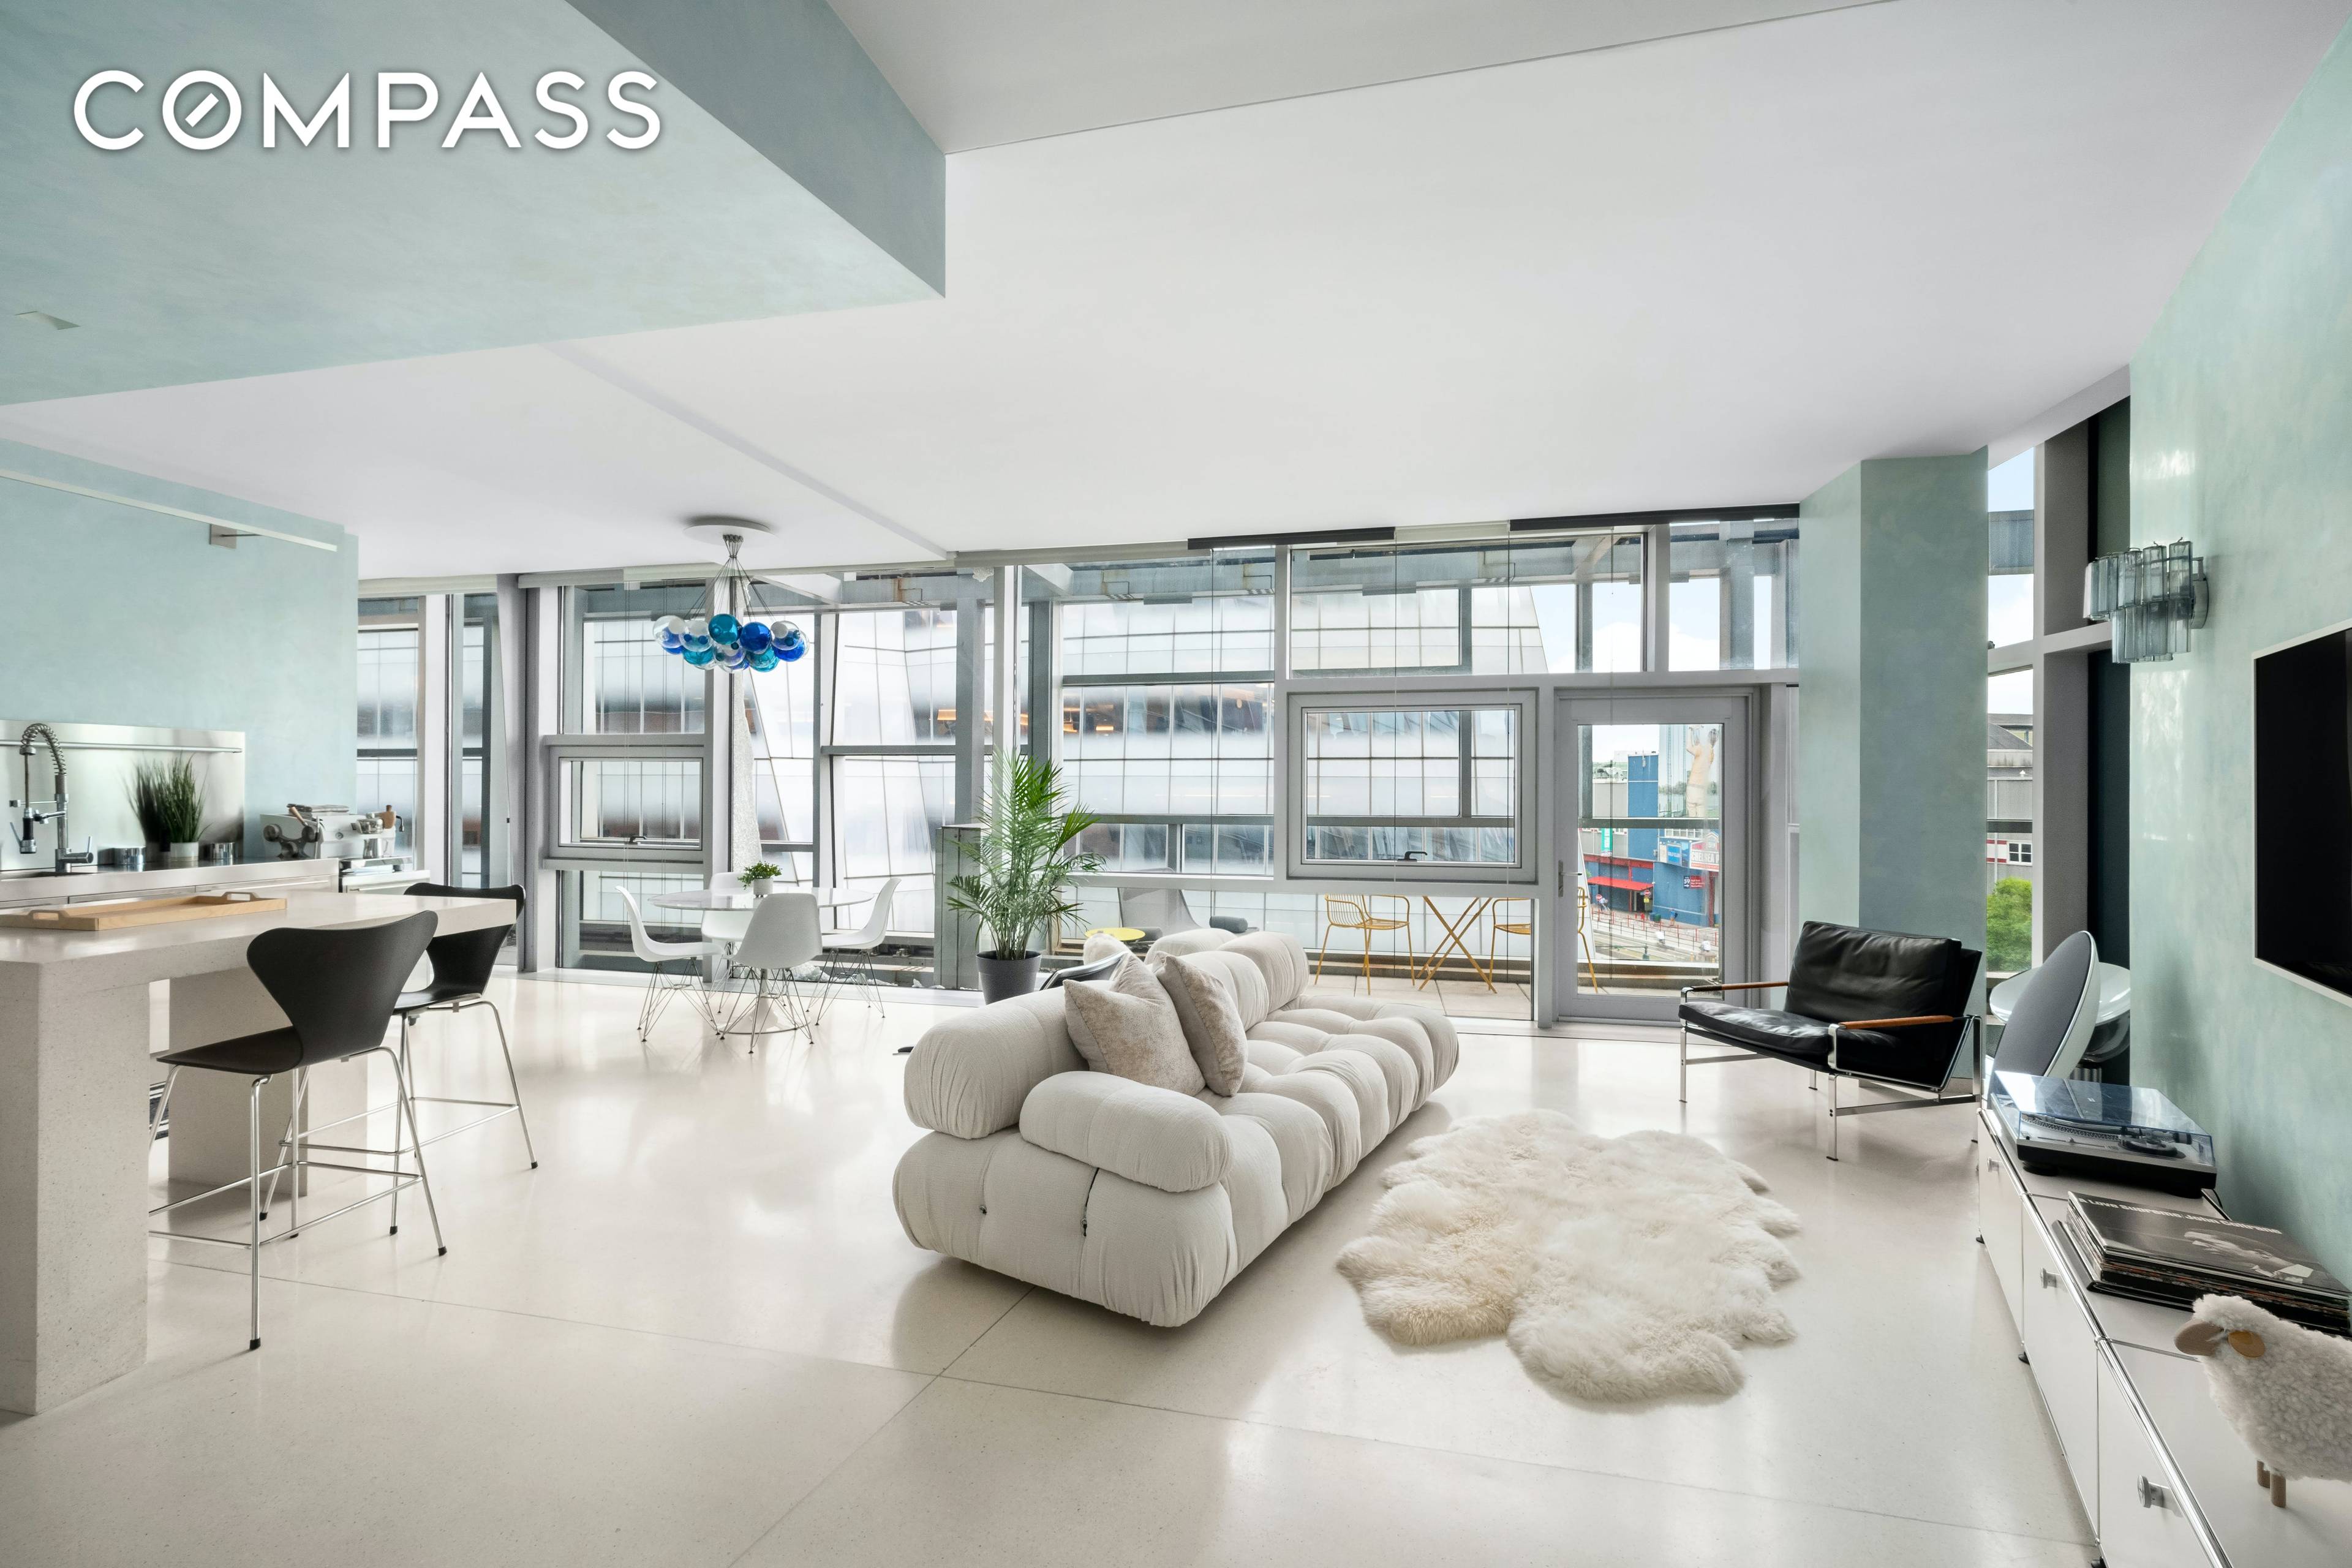 Located in West Chelsea at Jean Nouvel s acclaimed 100 11th Avenue masterpiece, residence 5C is an exquisite, oversized one bedroom, one and a half bath with a 145 sq ...